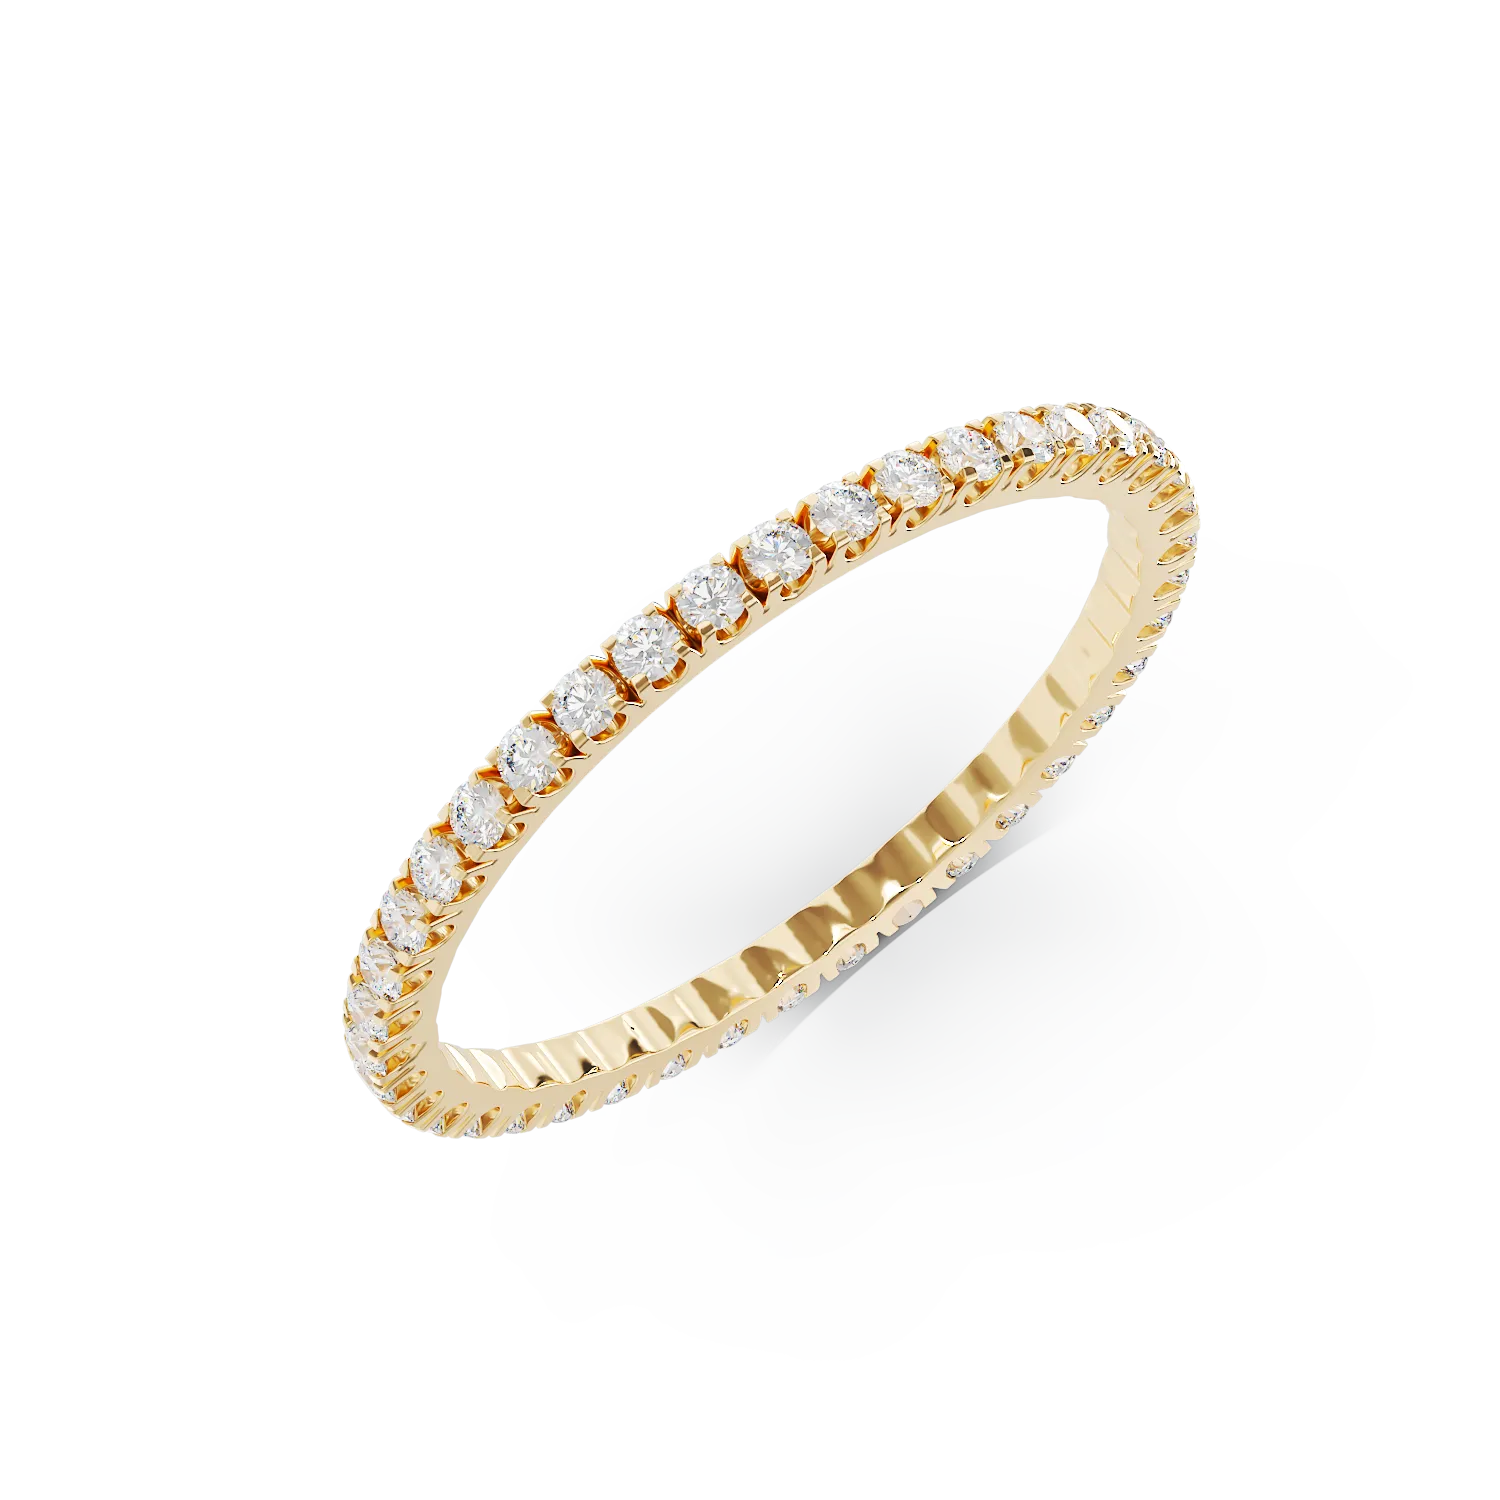 Eternity ring in yellow gold with 0.5ct diamonds